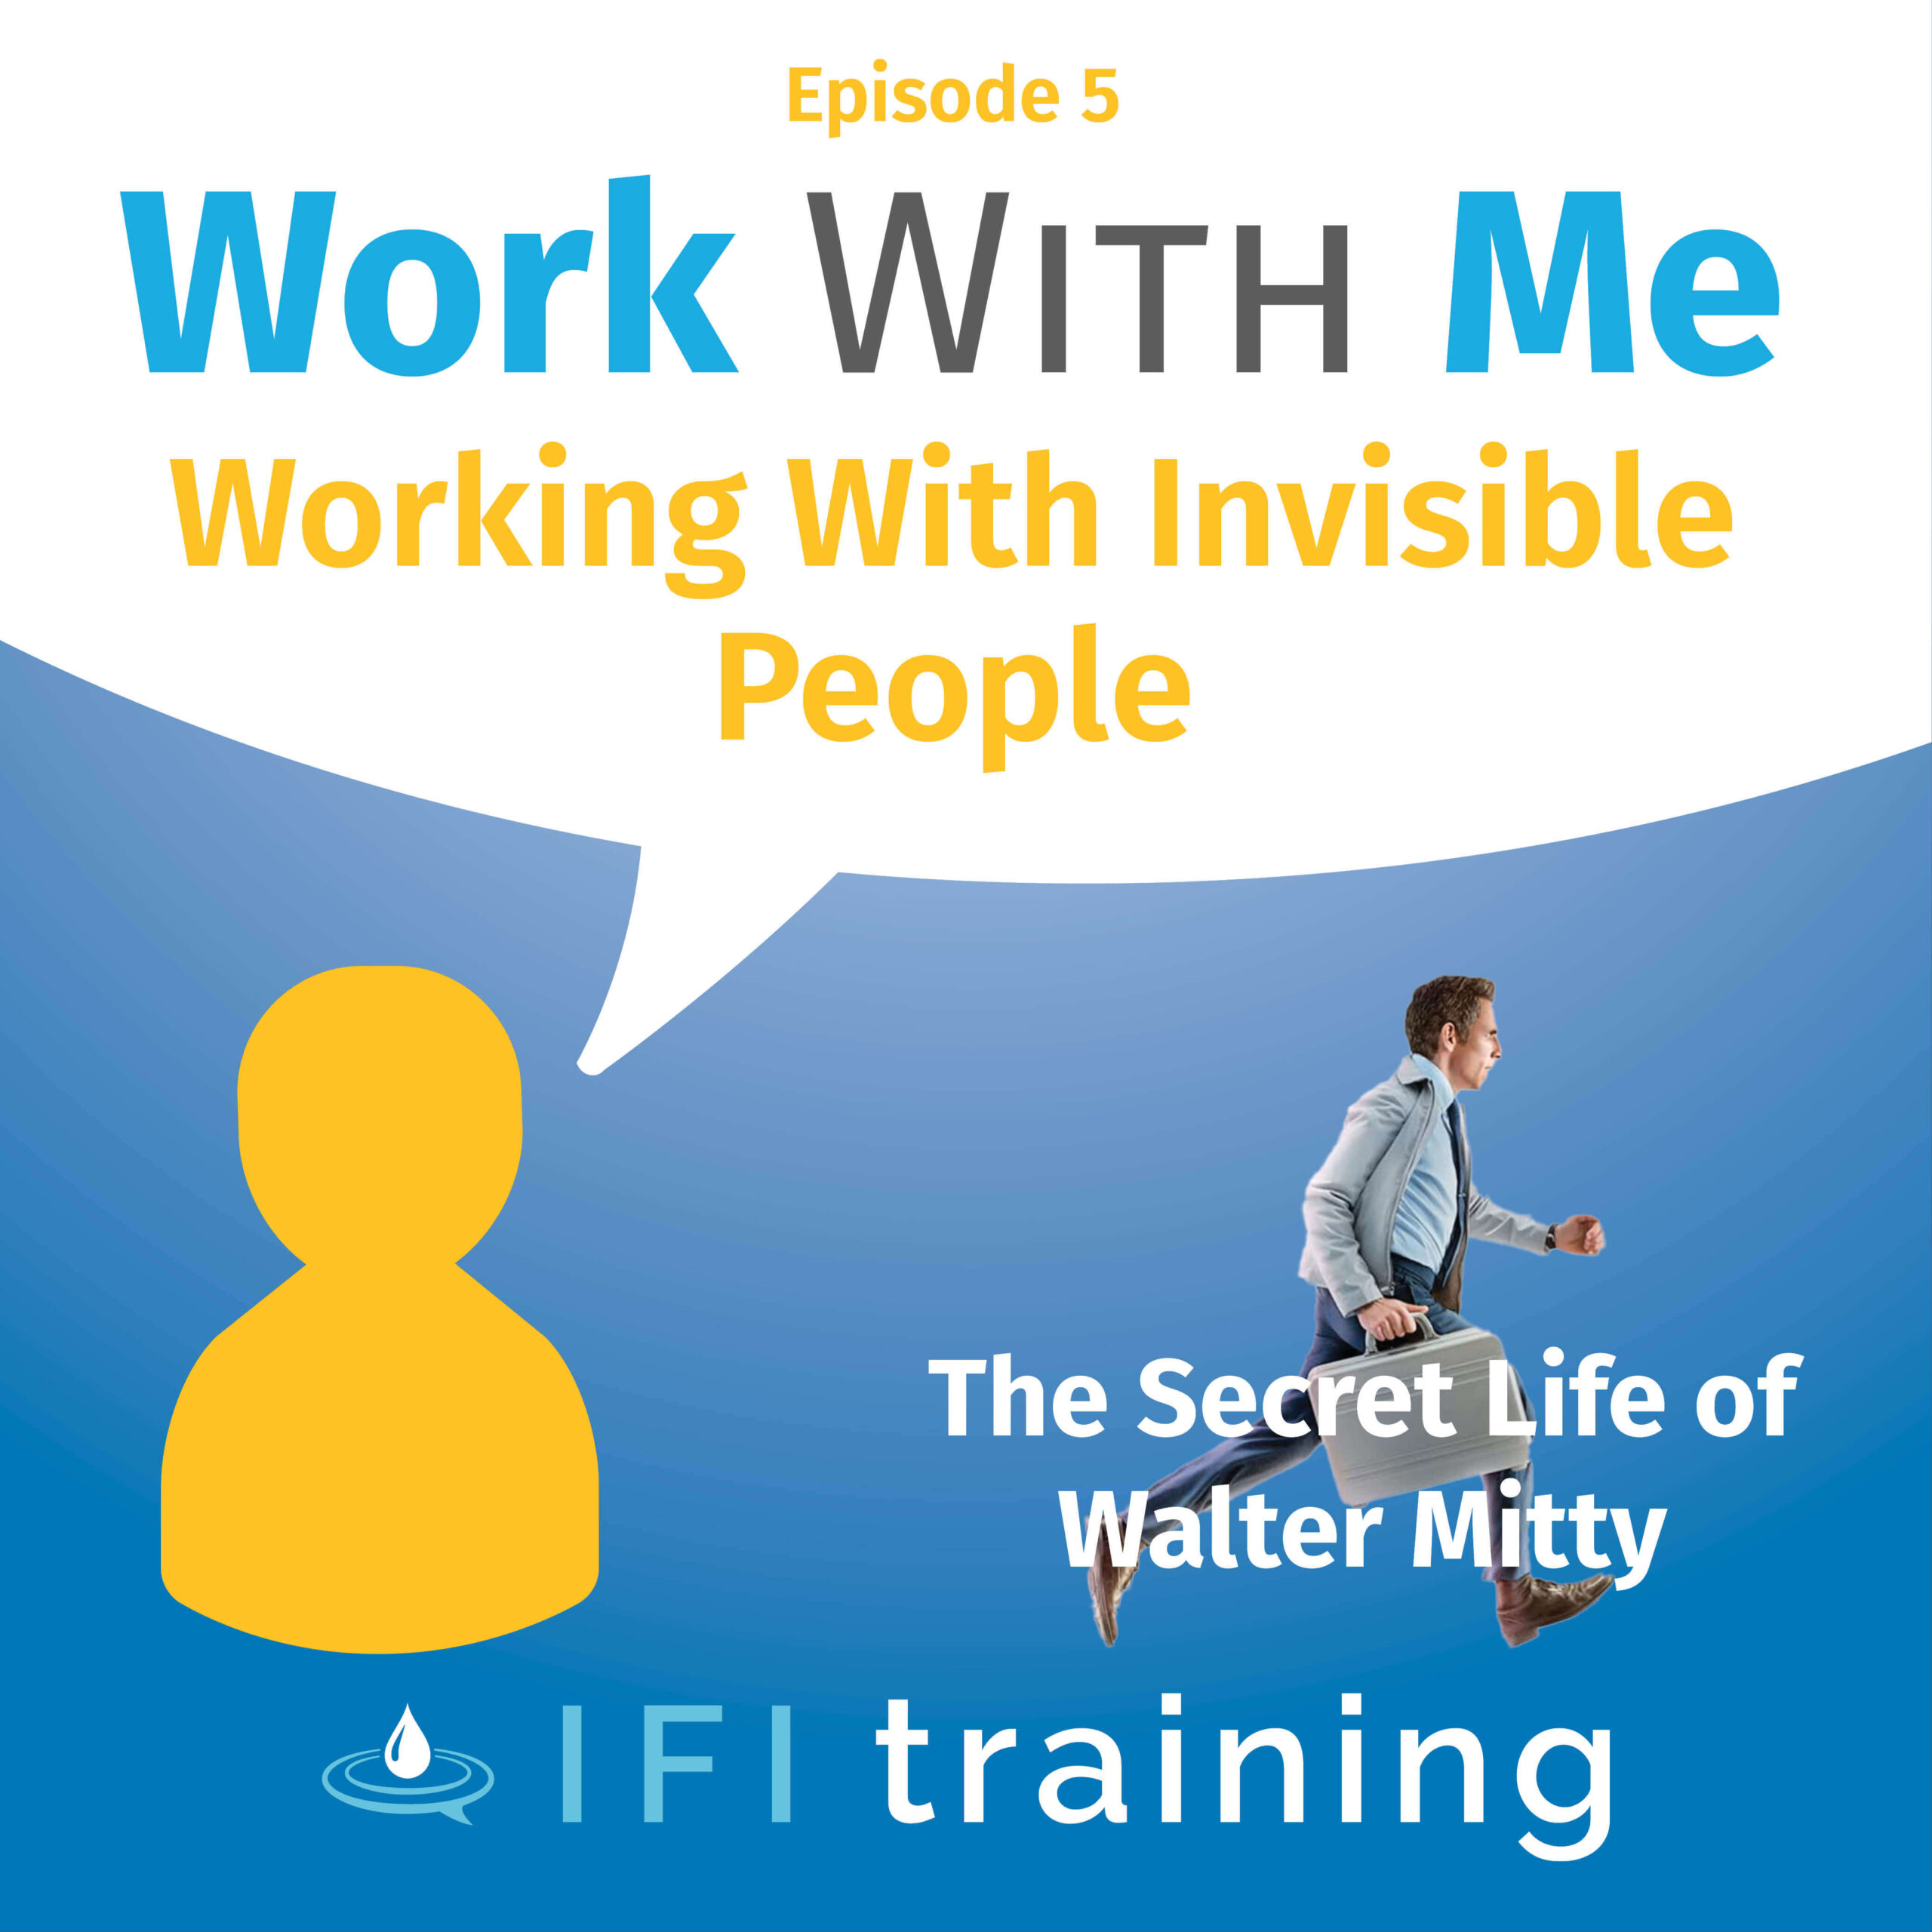 Episode Cover: Working with Invisible People - the Secret Life of Walter Mitty